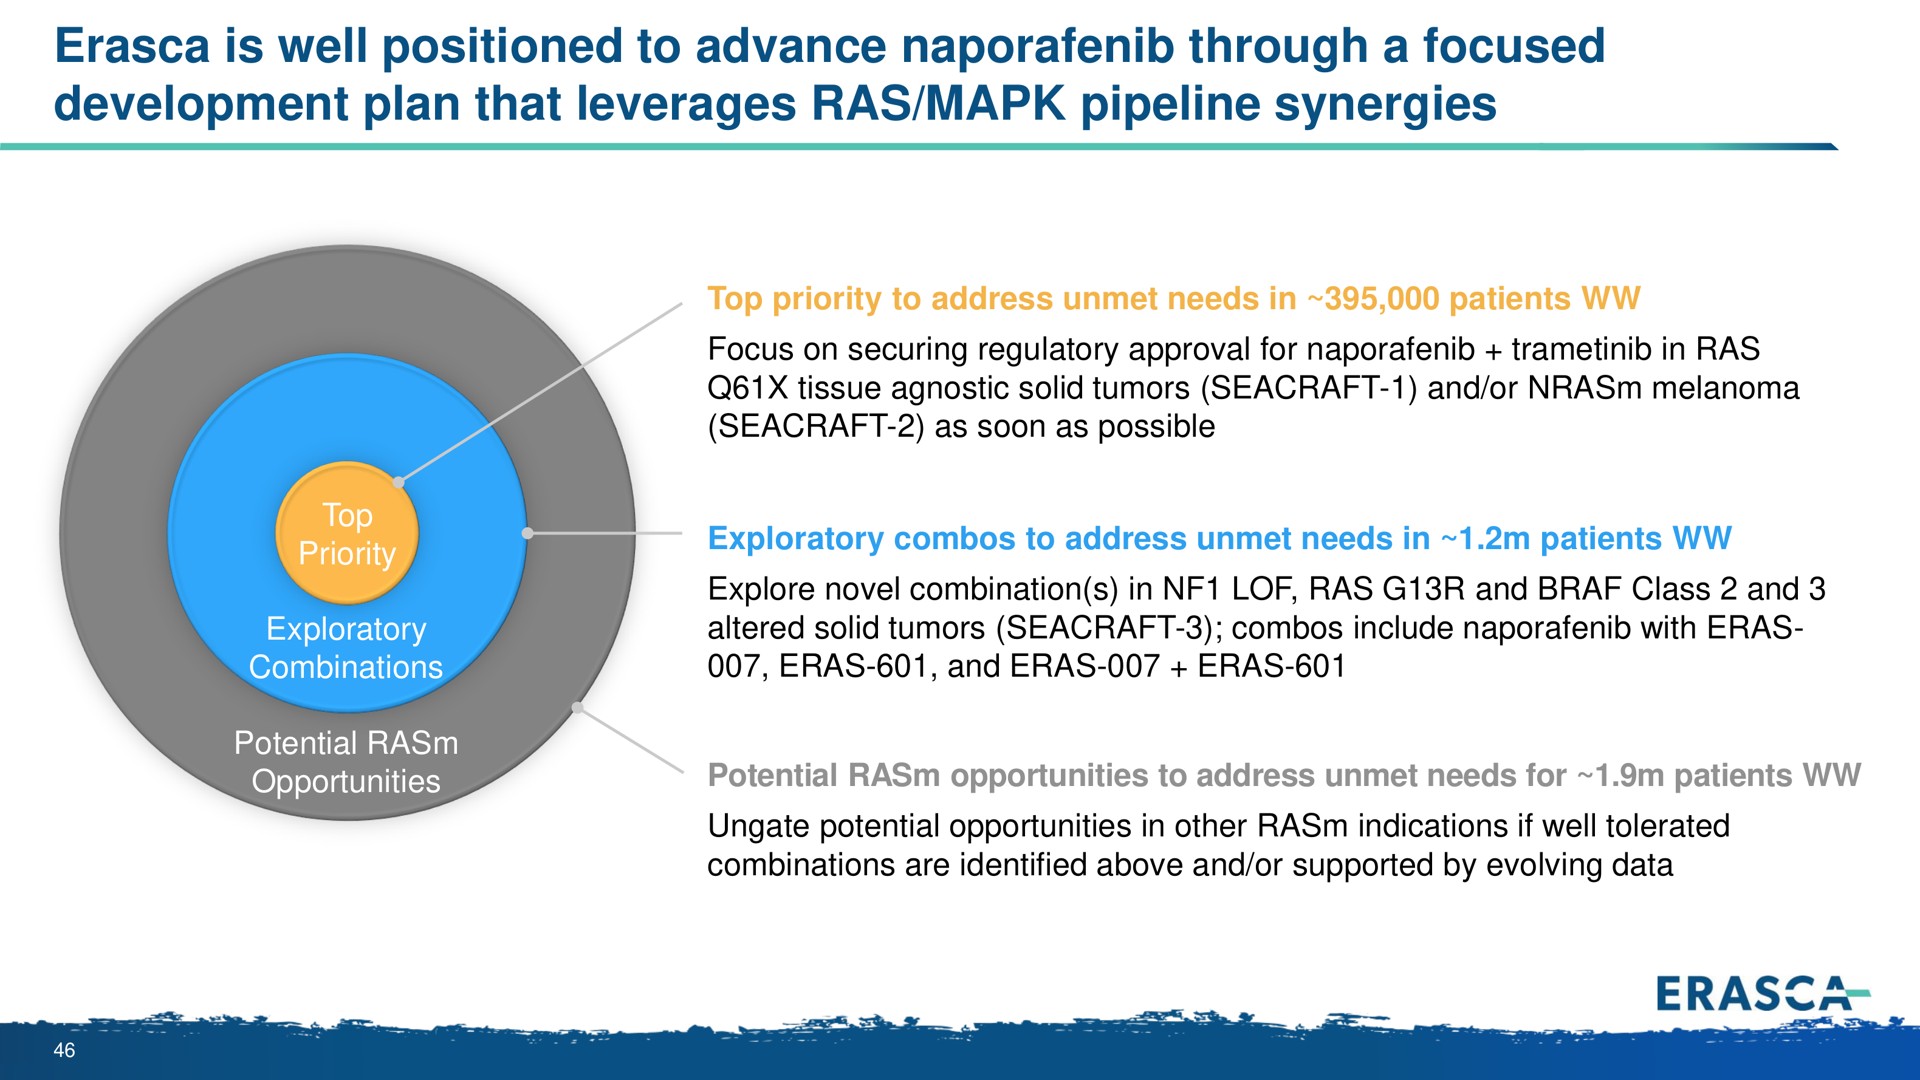 is well positioned to advance through a focused development plan that leverages ras pipeline synergies | Erasca